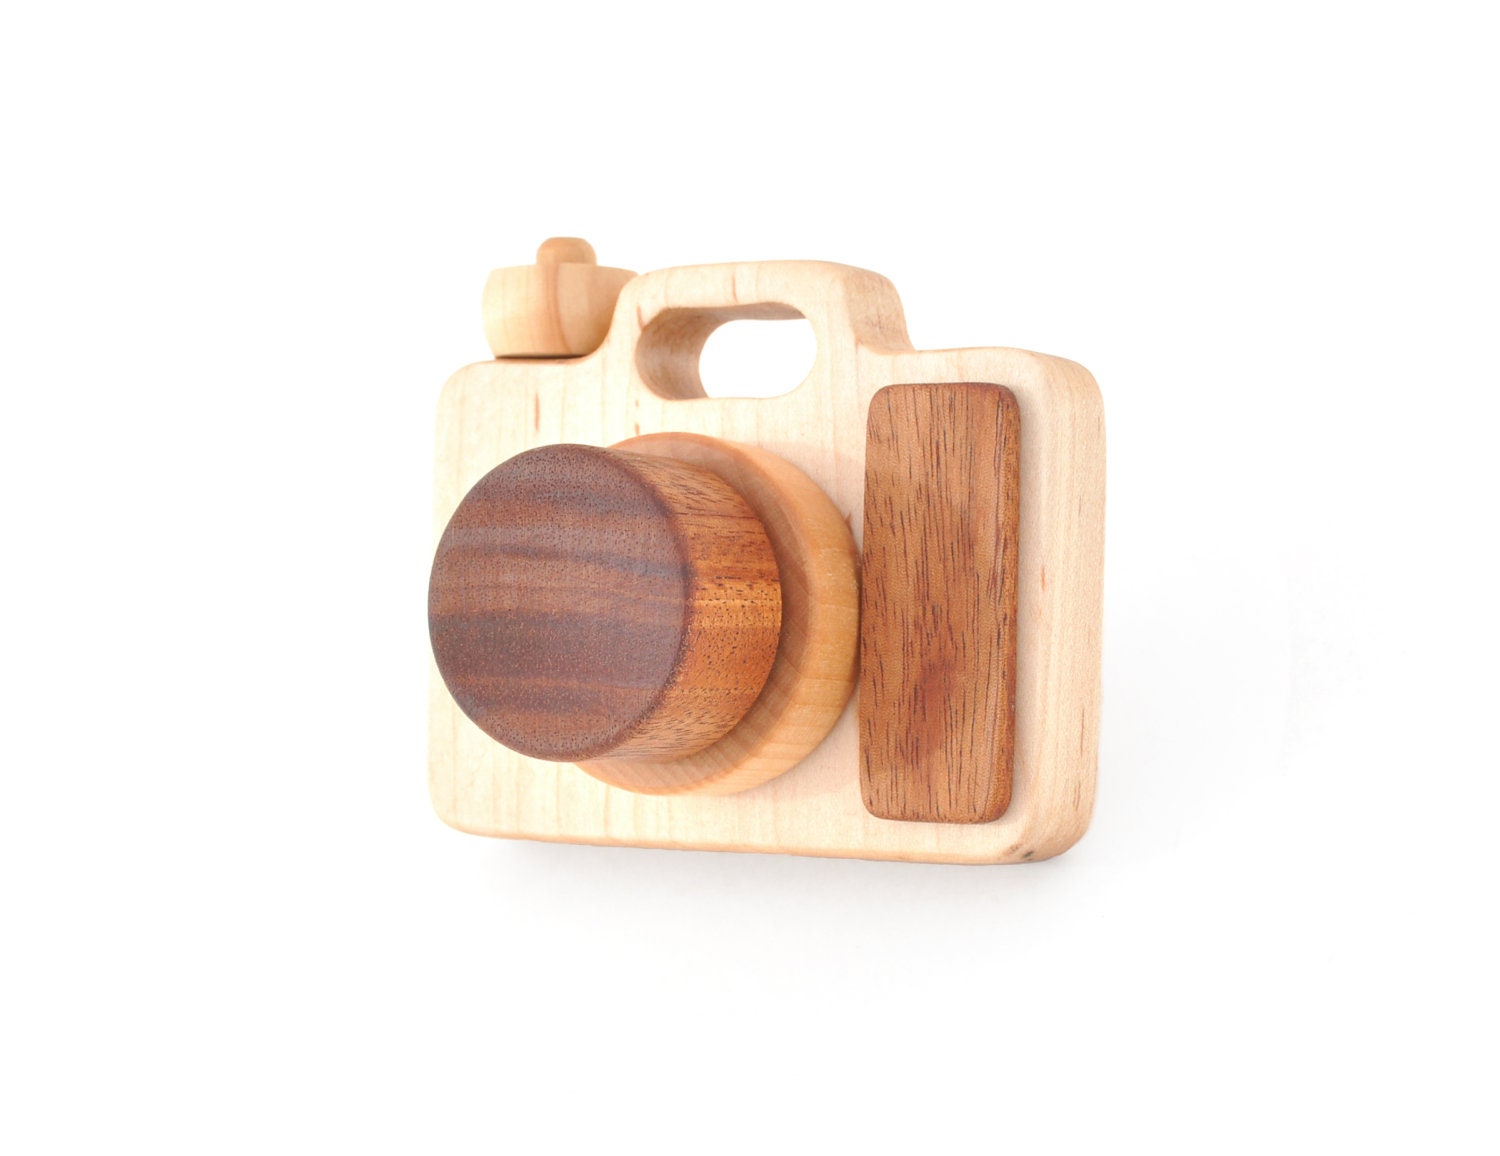 Wooden Toy Camera Eco-friendly Imagination Toy Pretend